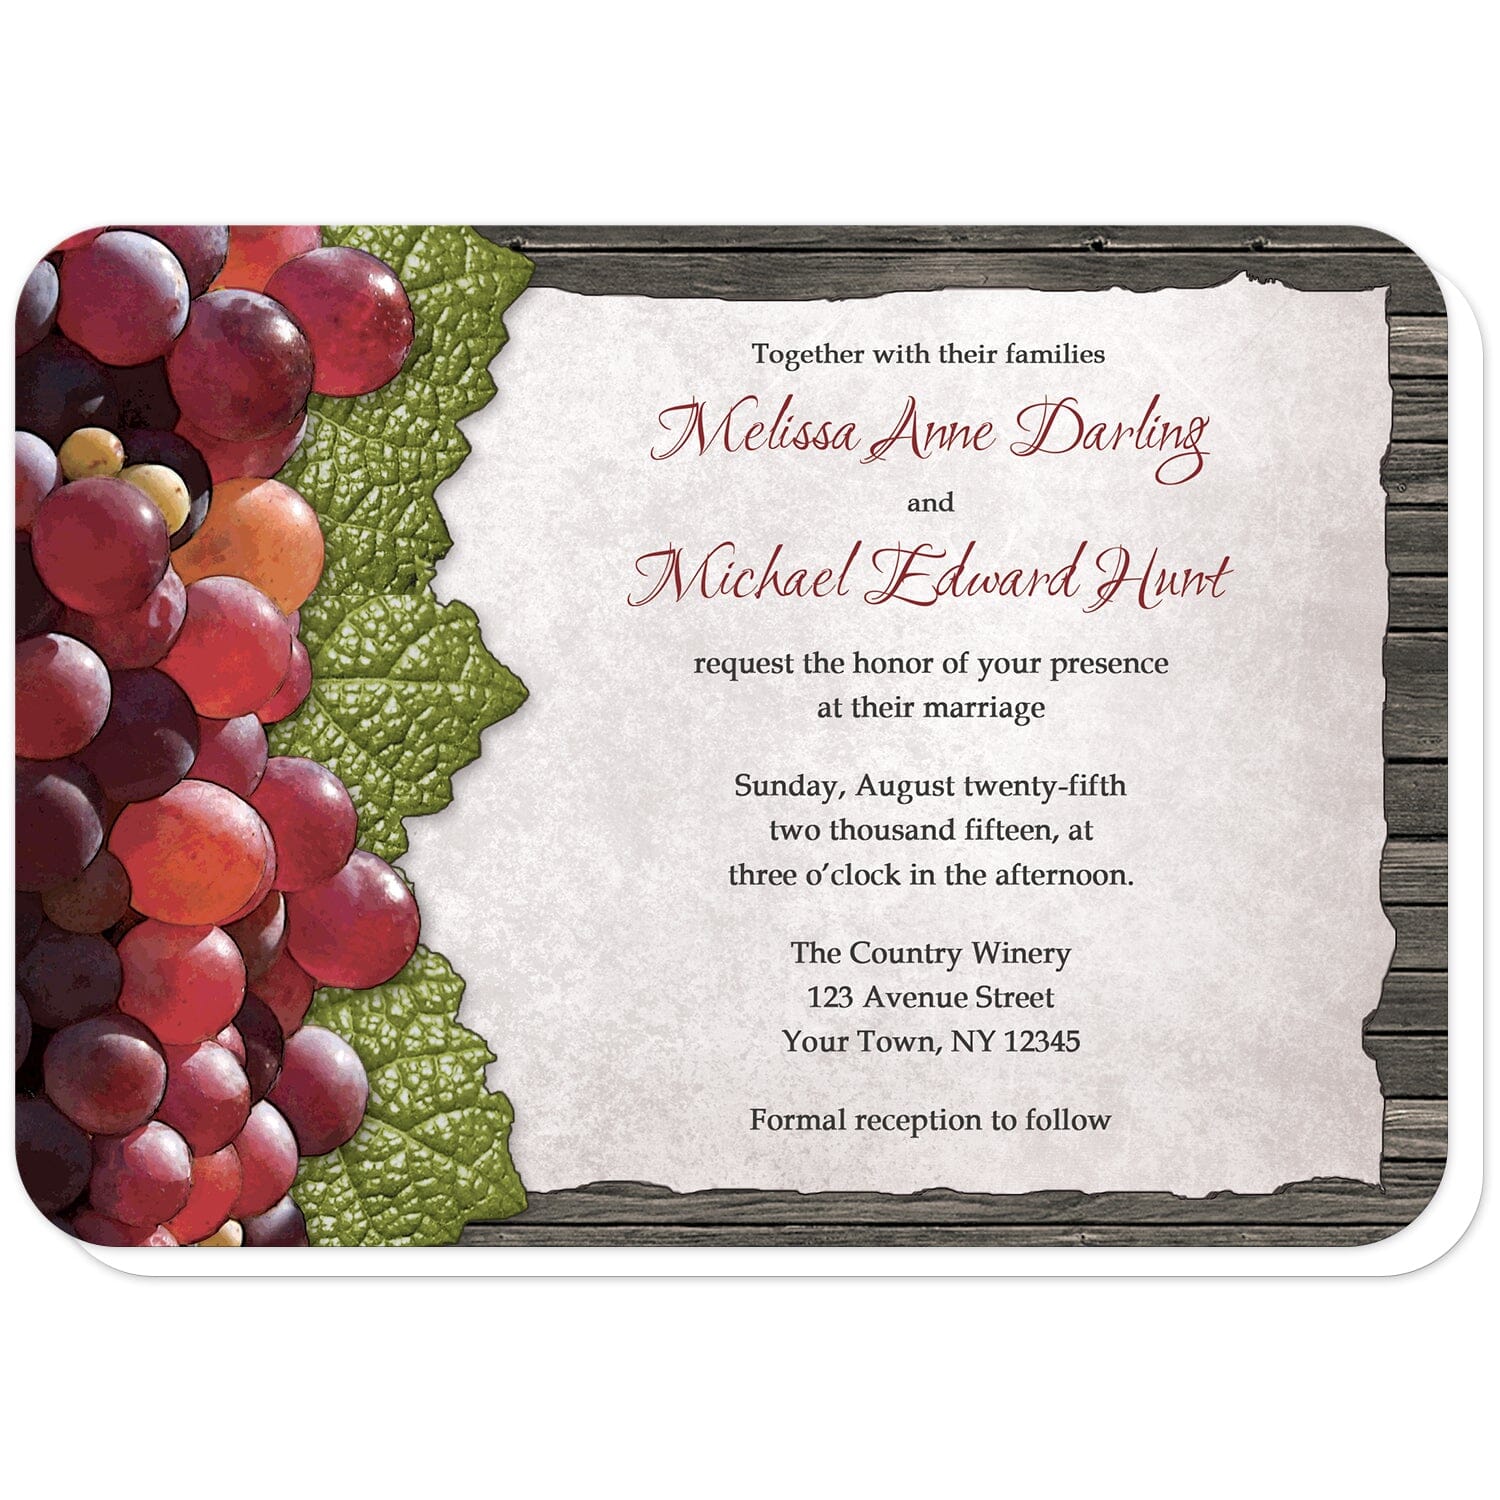 Rustic Winery Grapes and Wood Wedding Invitations (with rounded corners) at Artistically Invited. Rustic winery grapes and wood wedding invitations designed with rustic red grapes and green leaves along the left side. Your personalized marriage celebration details are custom printed in dark red and brown on a torn parchment paper design over dark brown wood. 